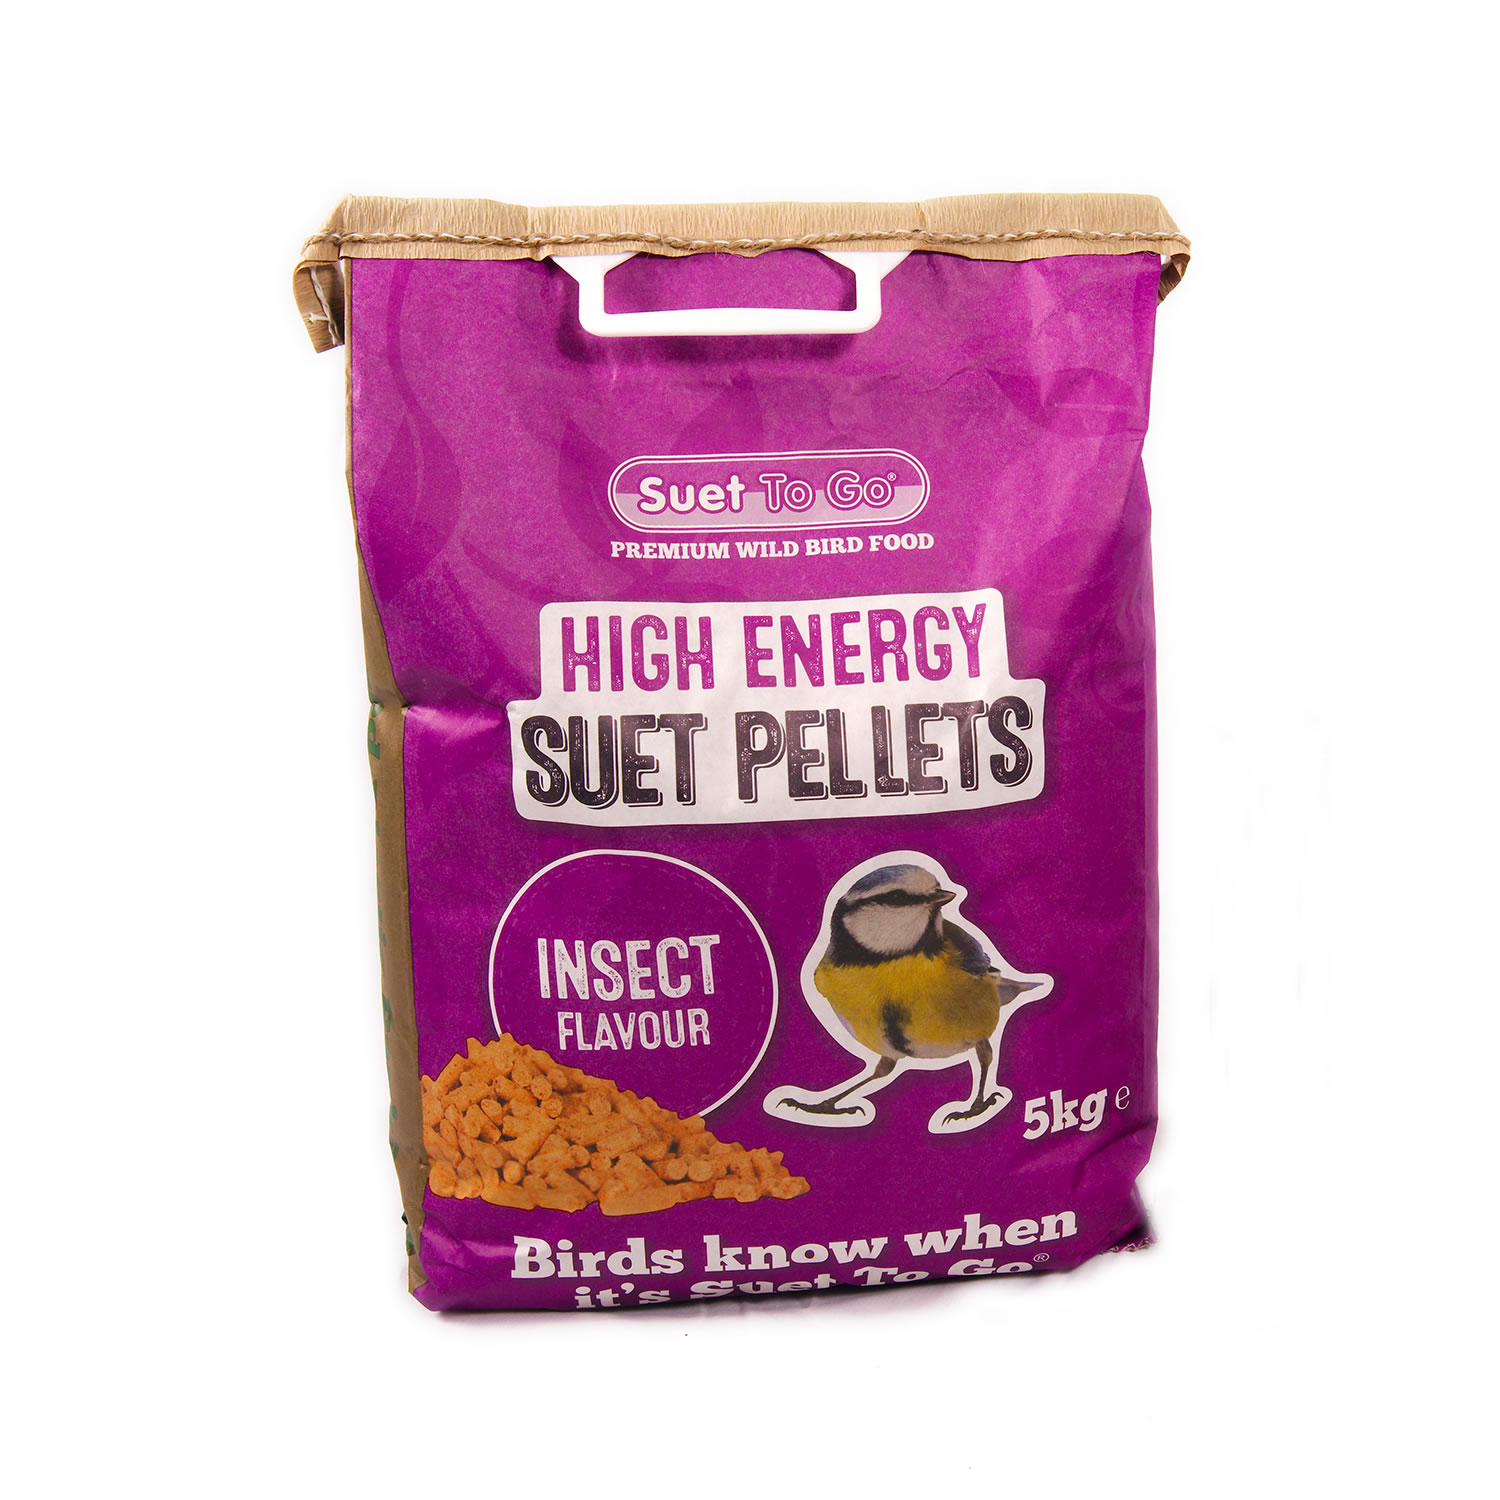 SUET TO GO HIGH ENERGY SUET PELLETS INSECT